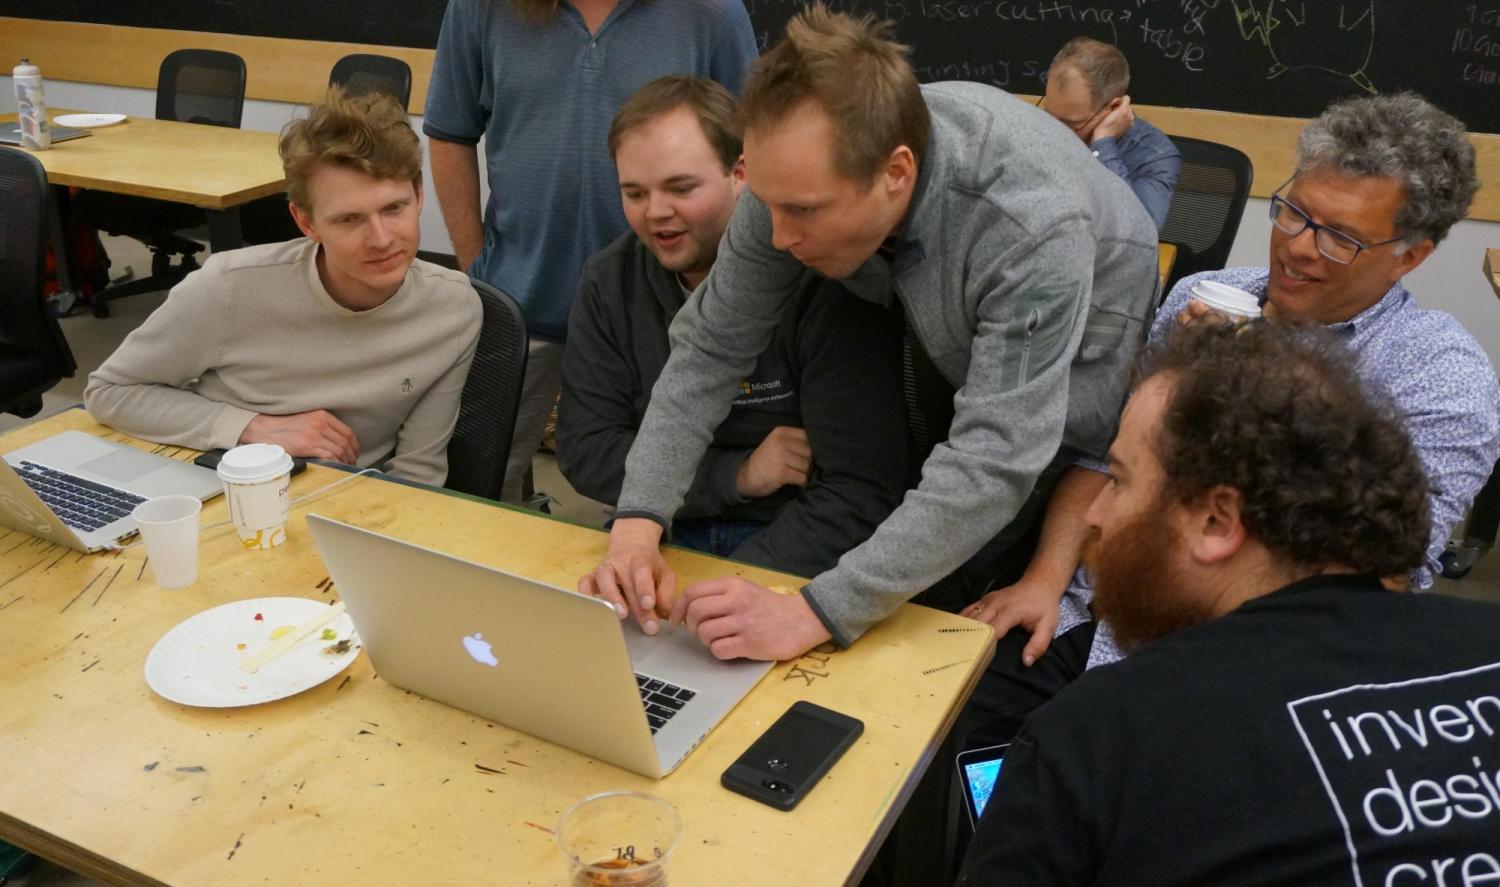 Tom Ball demonstrates MakeCode on his computer,  surrounded by workshop participants.